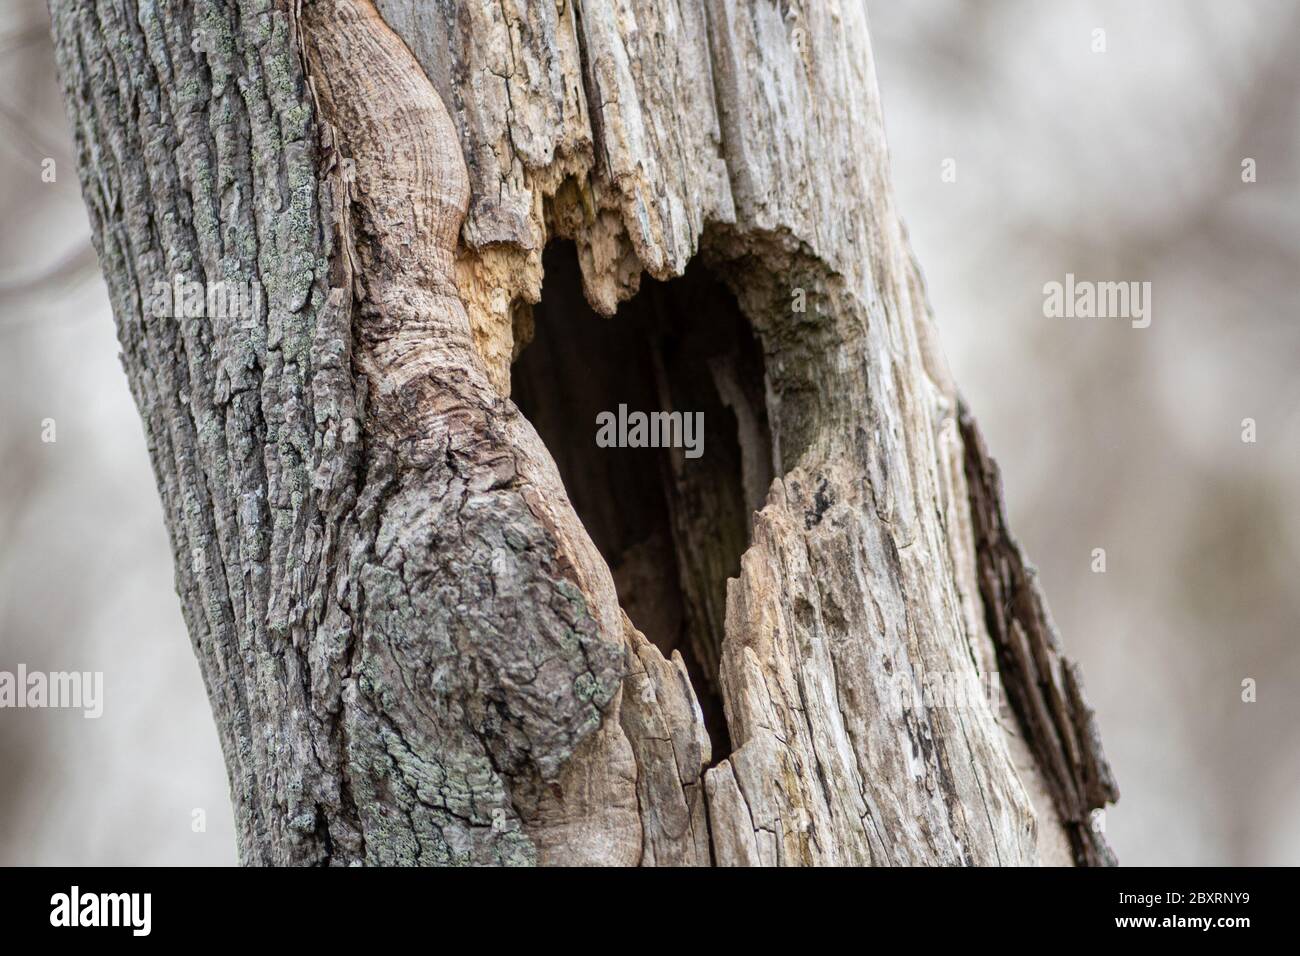 An old hollow maple tree in the forest with grey coloured bark. There's a hole in tree in the shape or pattern of a heart. Stock Photo